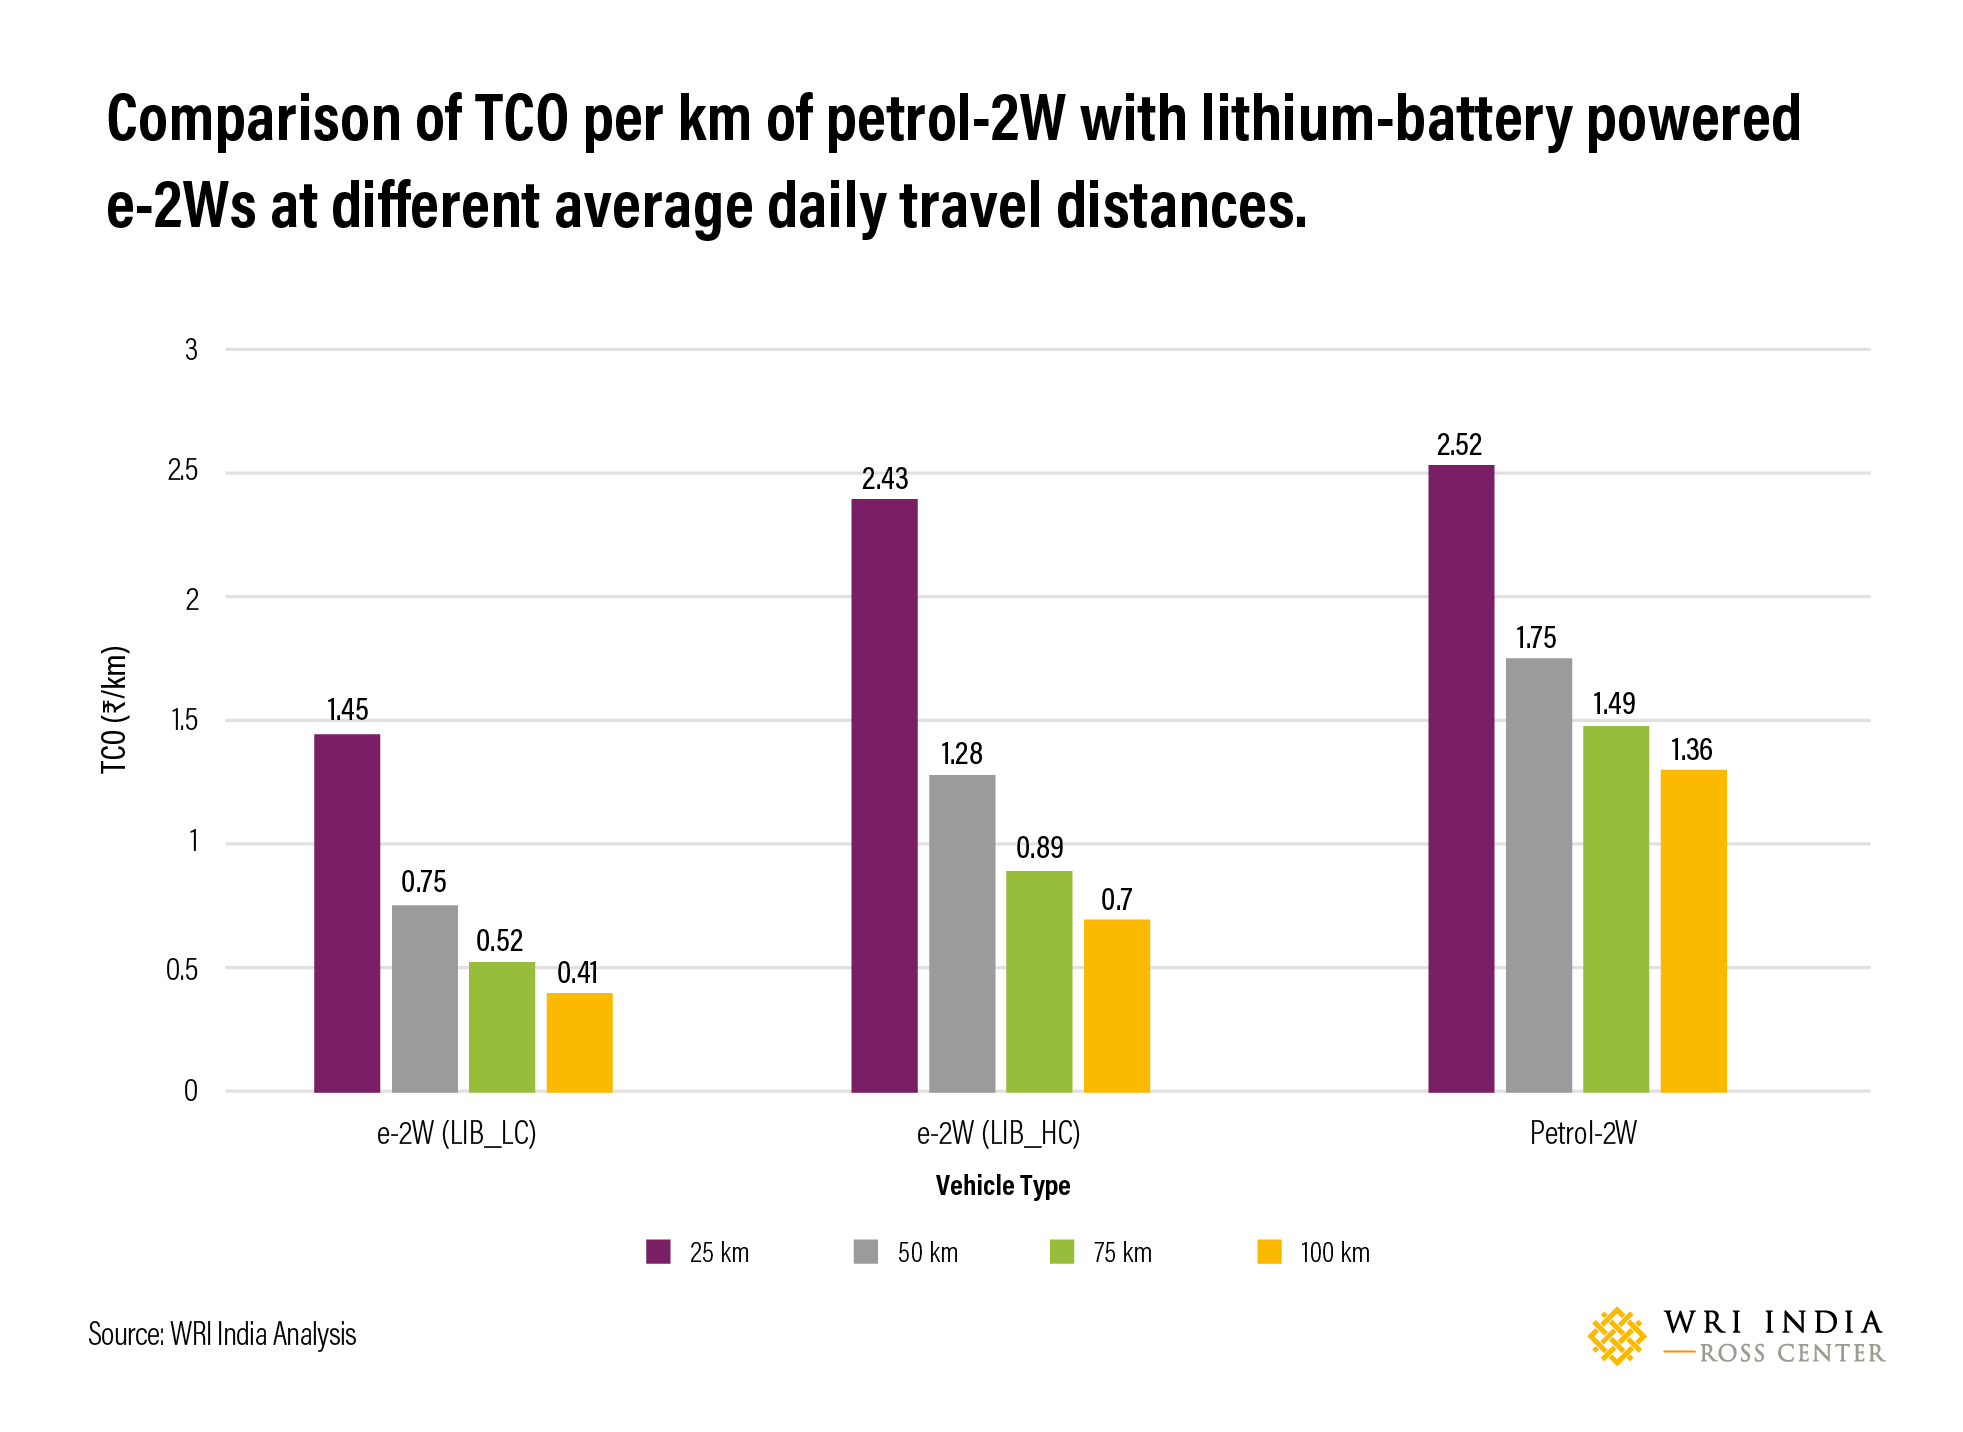 TCO per km of petrol-2W with lithium-battery powered e-2Ws